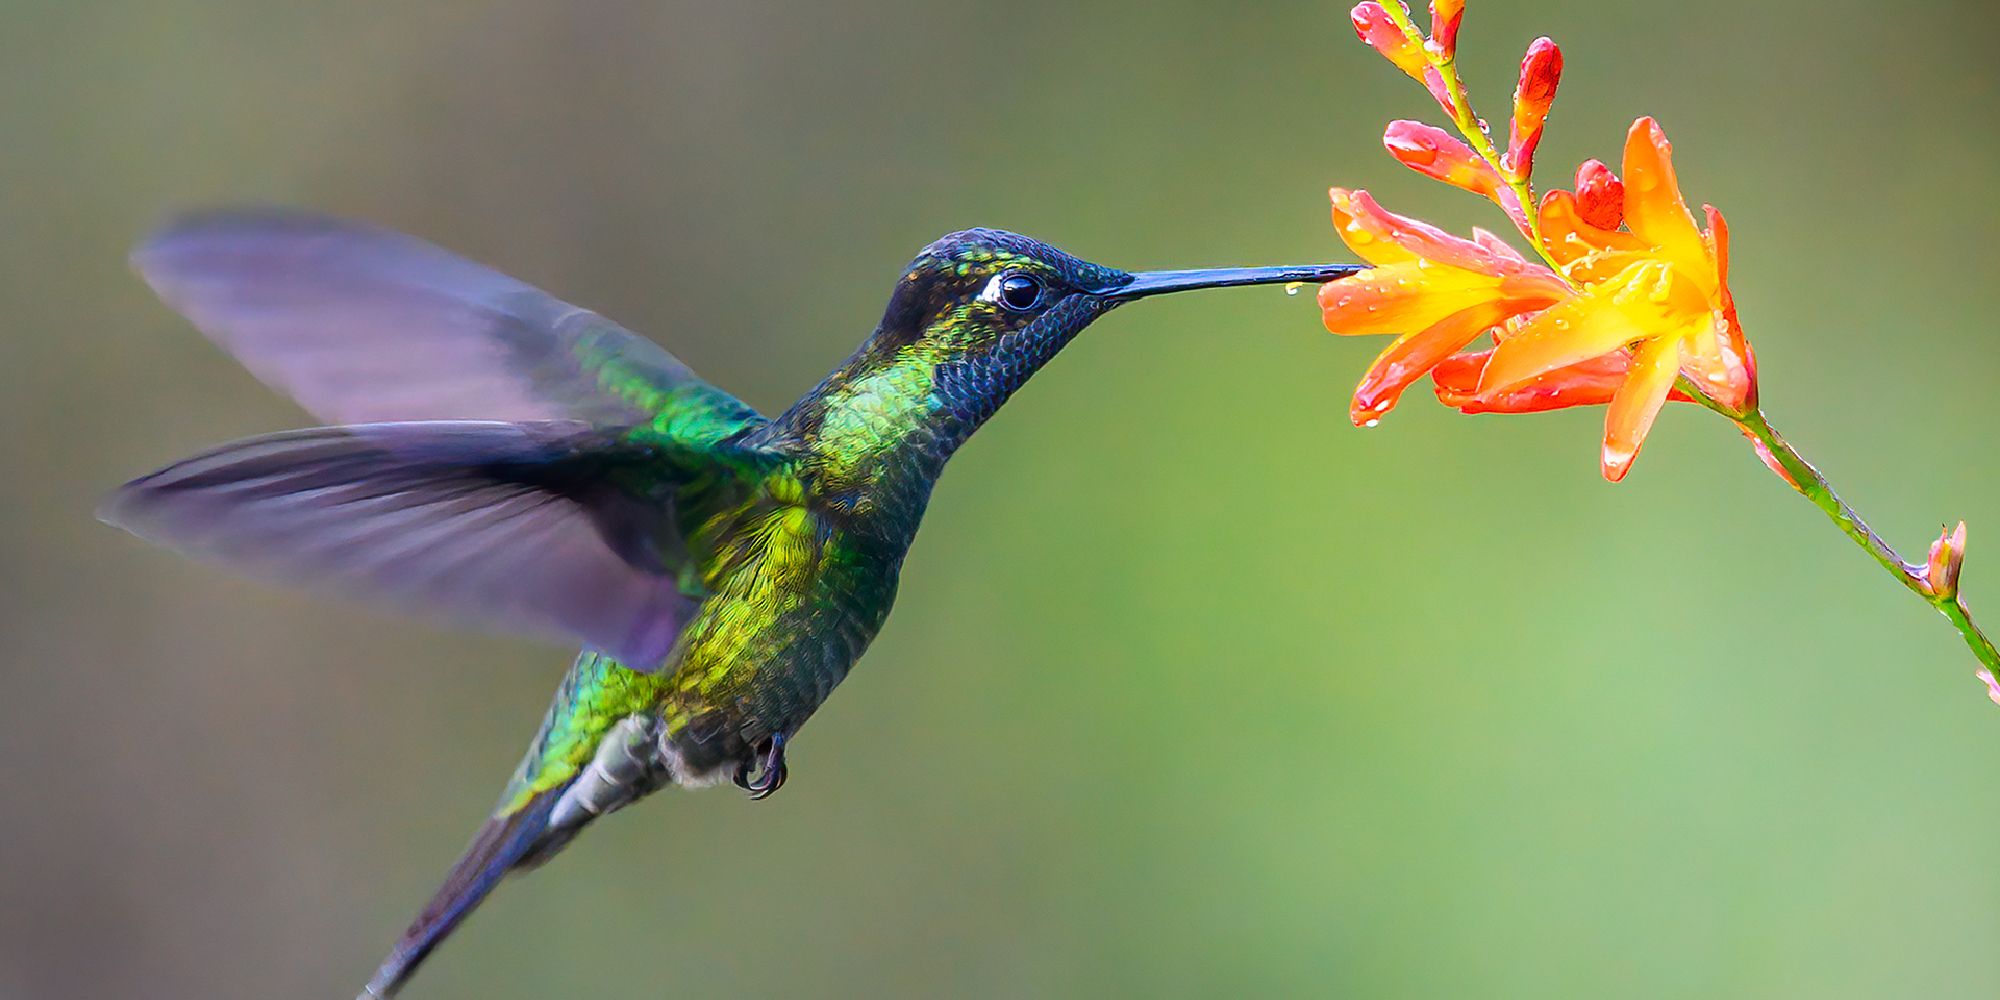 A hummingbird stealing nectar from a plant